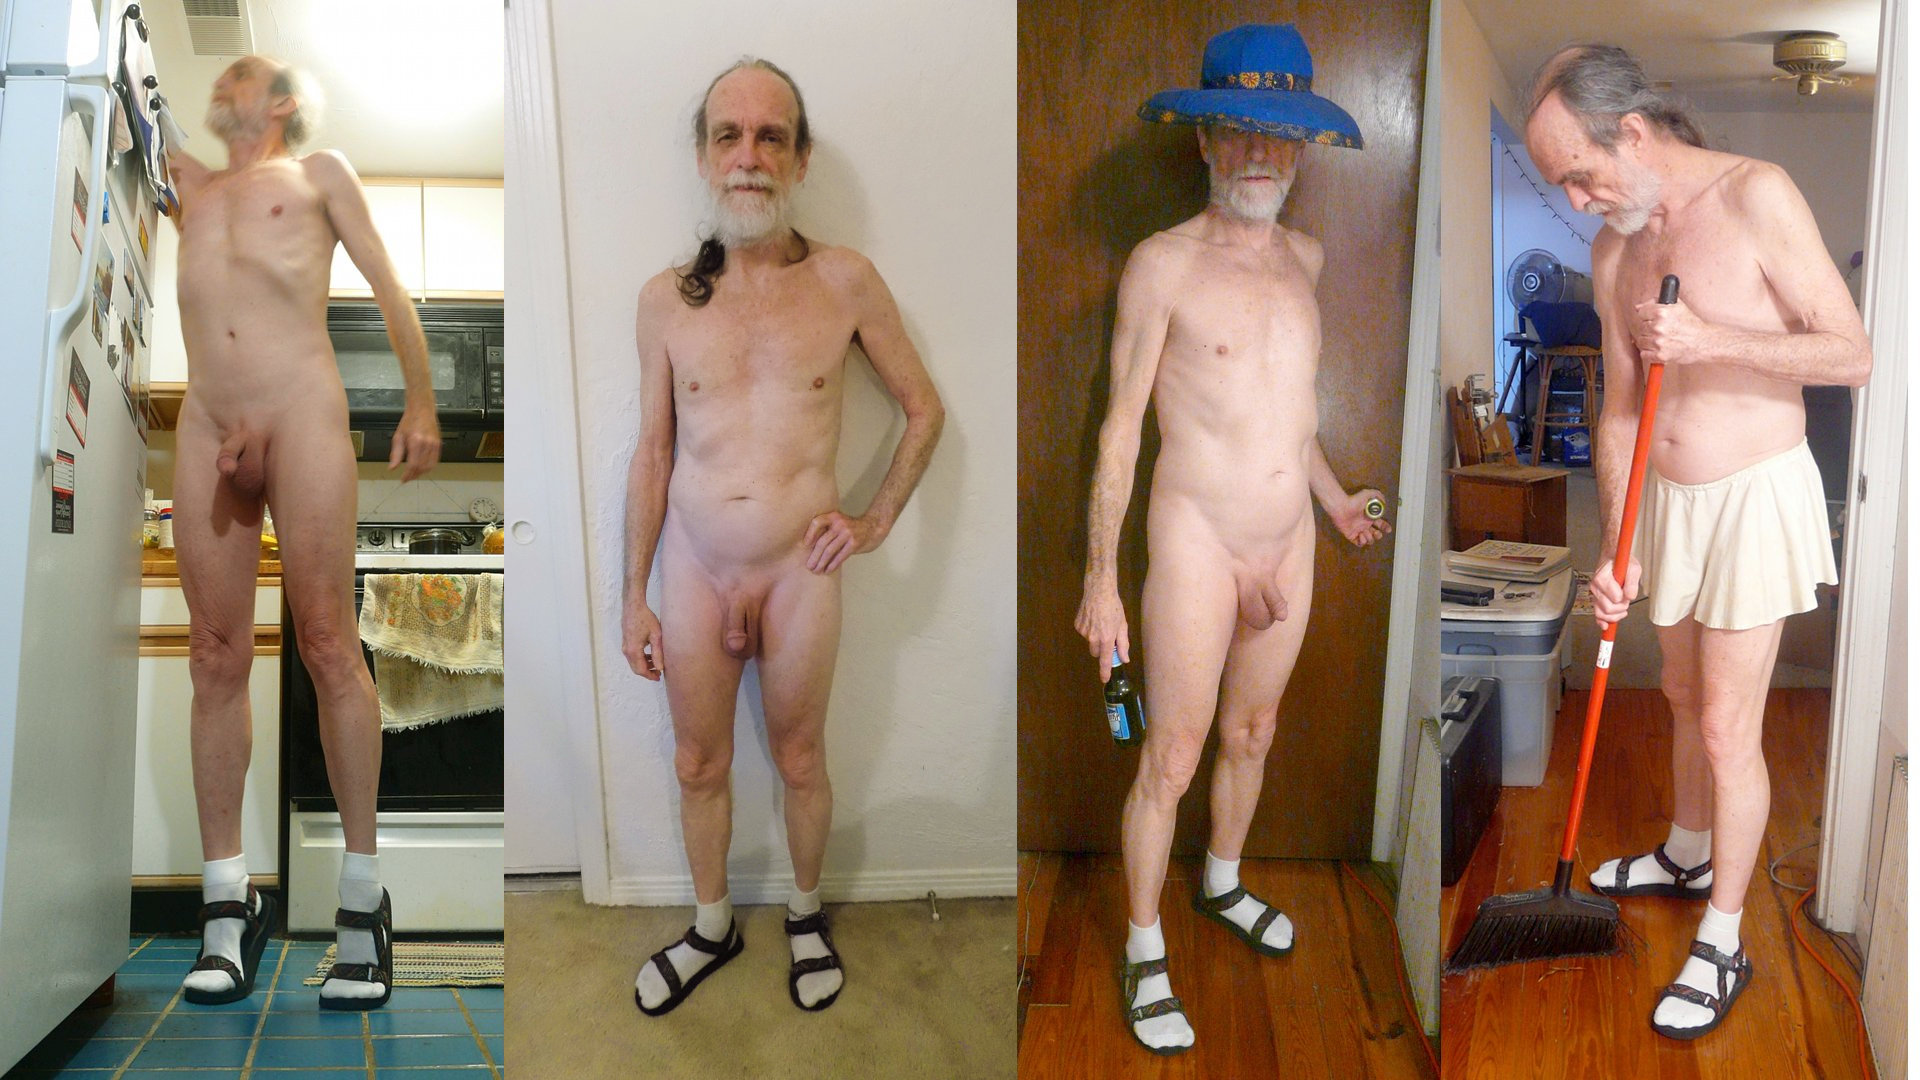 Four images of me in socks and sandals